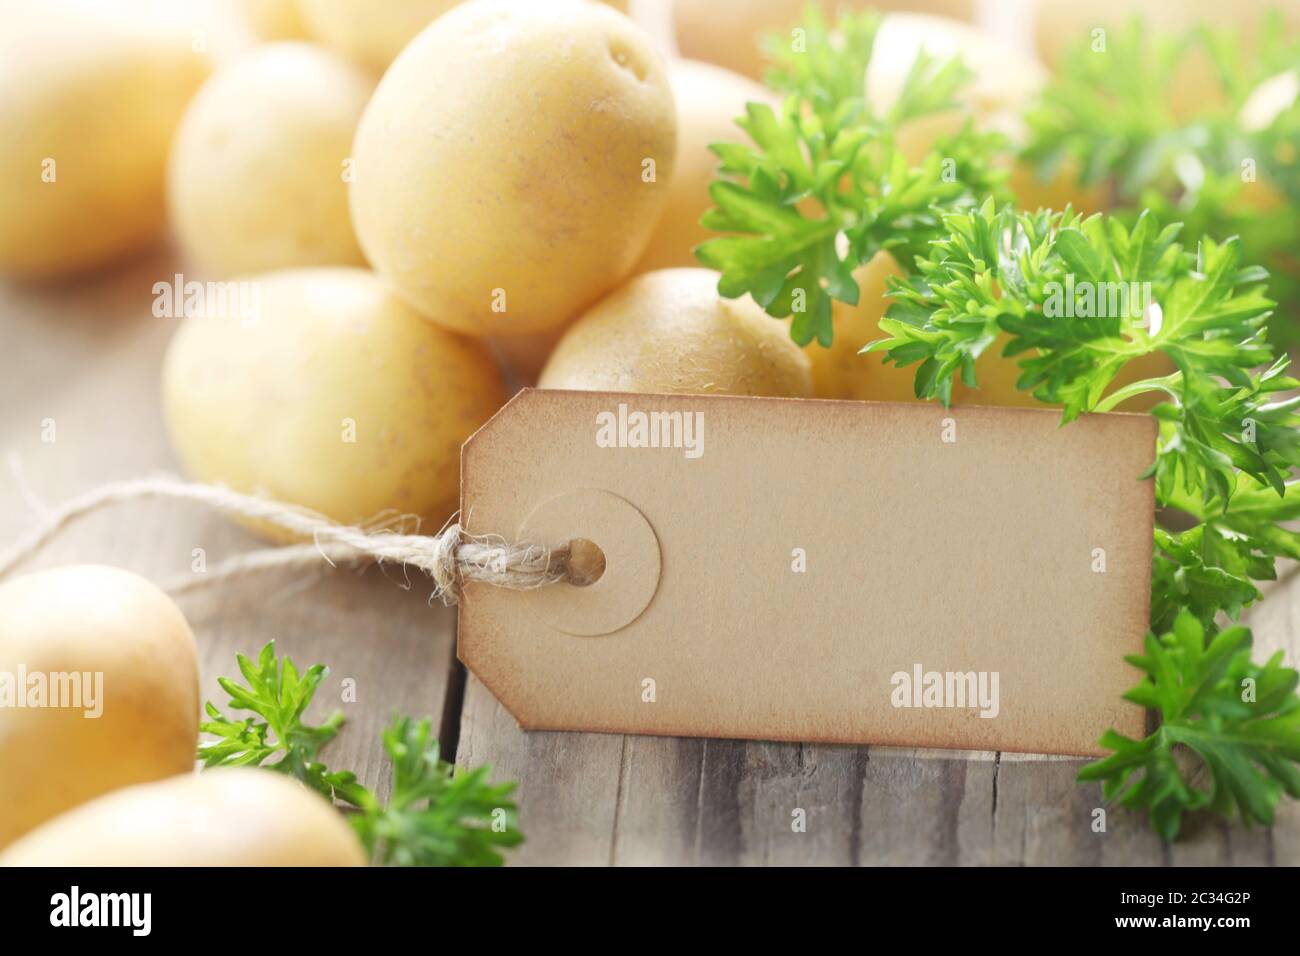 New Potatoes With A Blank Paper Label On A Wooden Background Stock Photo